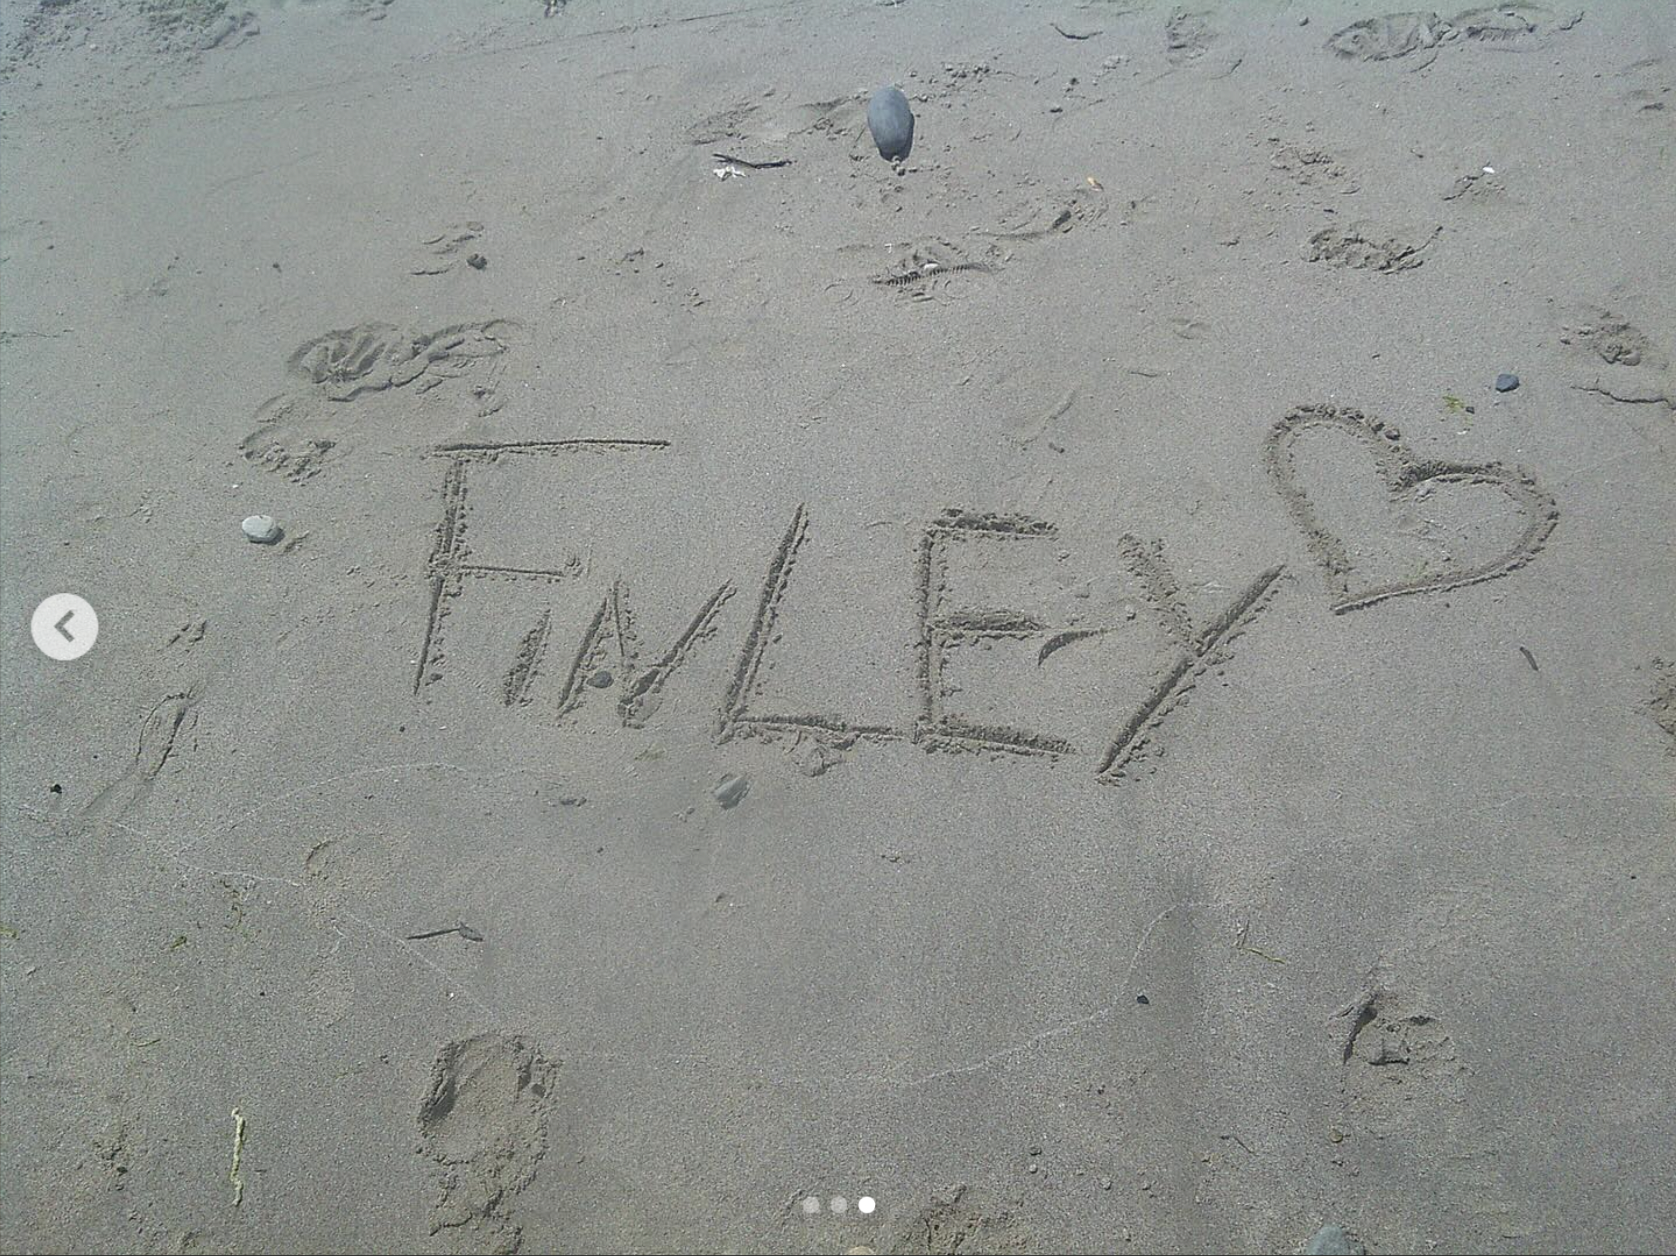 Finley Lockwood's name on the sand during Malibu beach trip, dated May 2024 | Source: Instagram/finleylockwood.offical